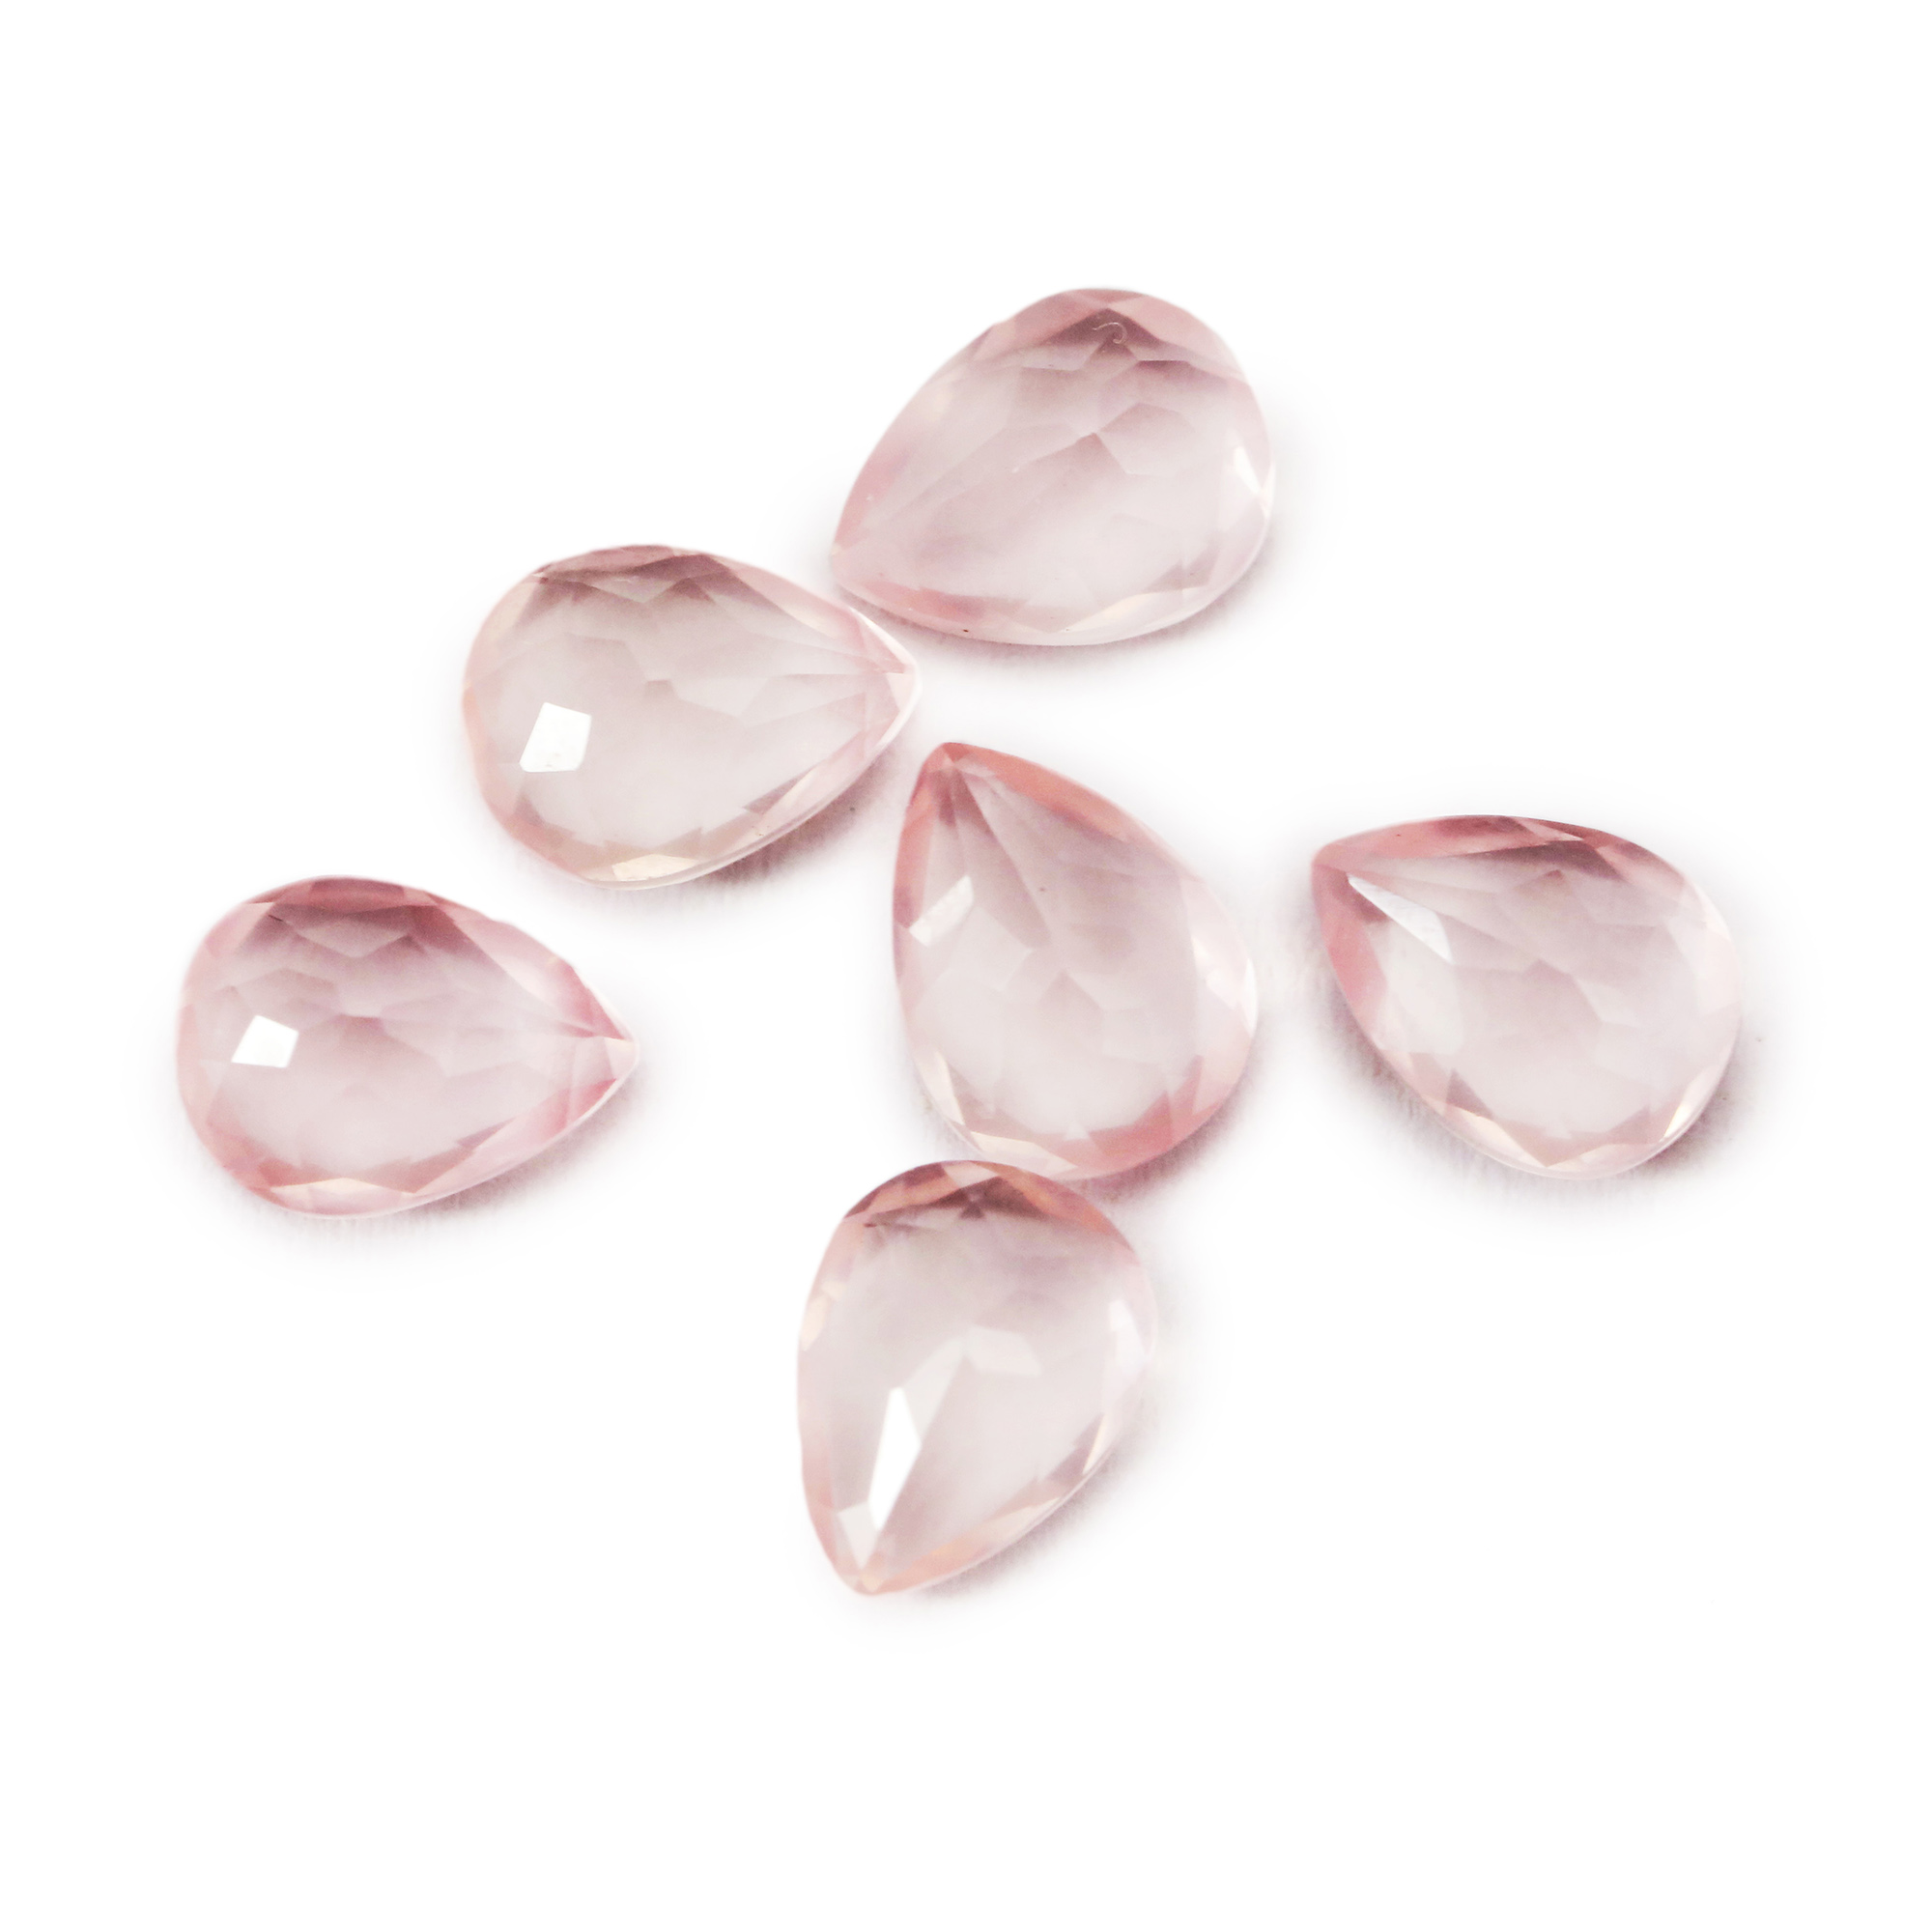 6x8MM Pear Faceted Natural Rose Quartz Pink Loose Gemstone Semi Precious Raw Stone for DIY Jewelry 4150021 - Click Image to Close